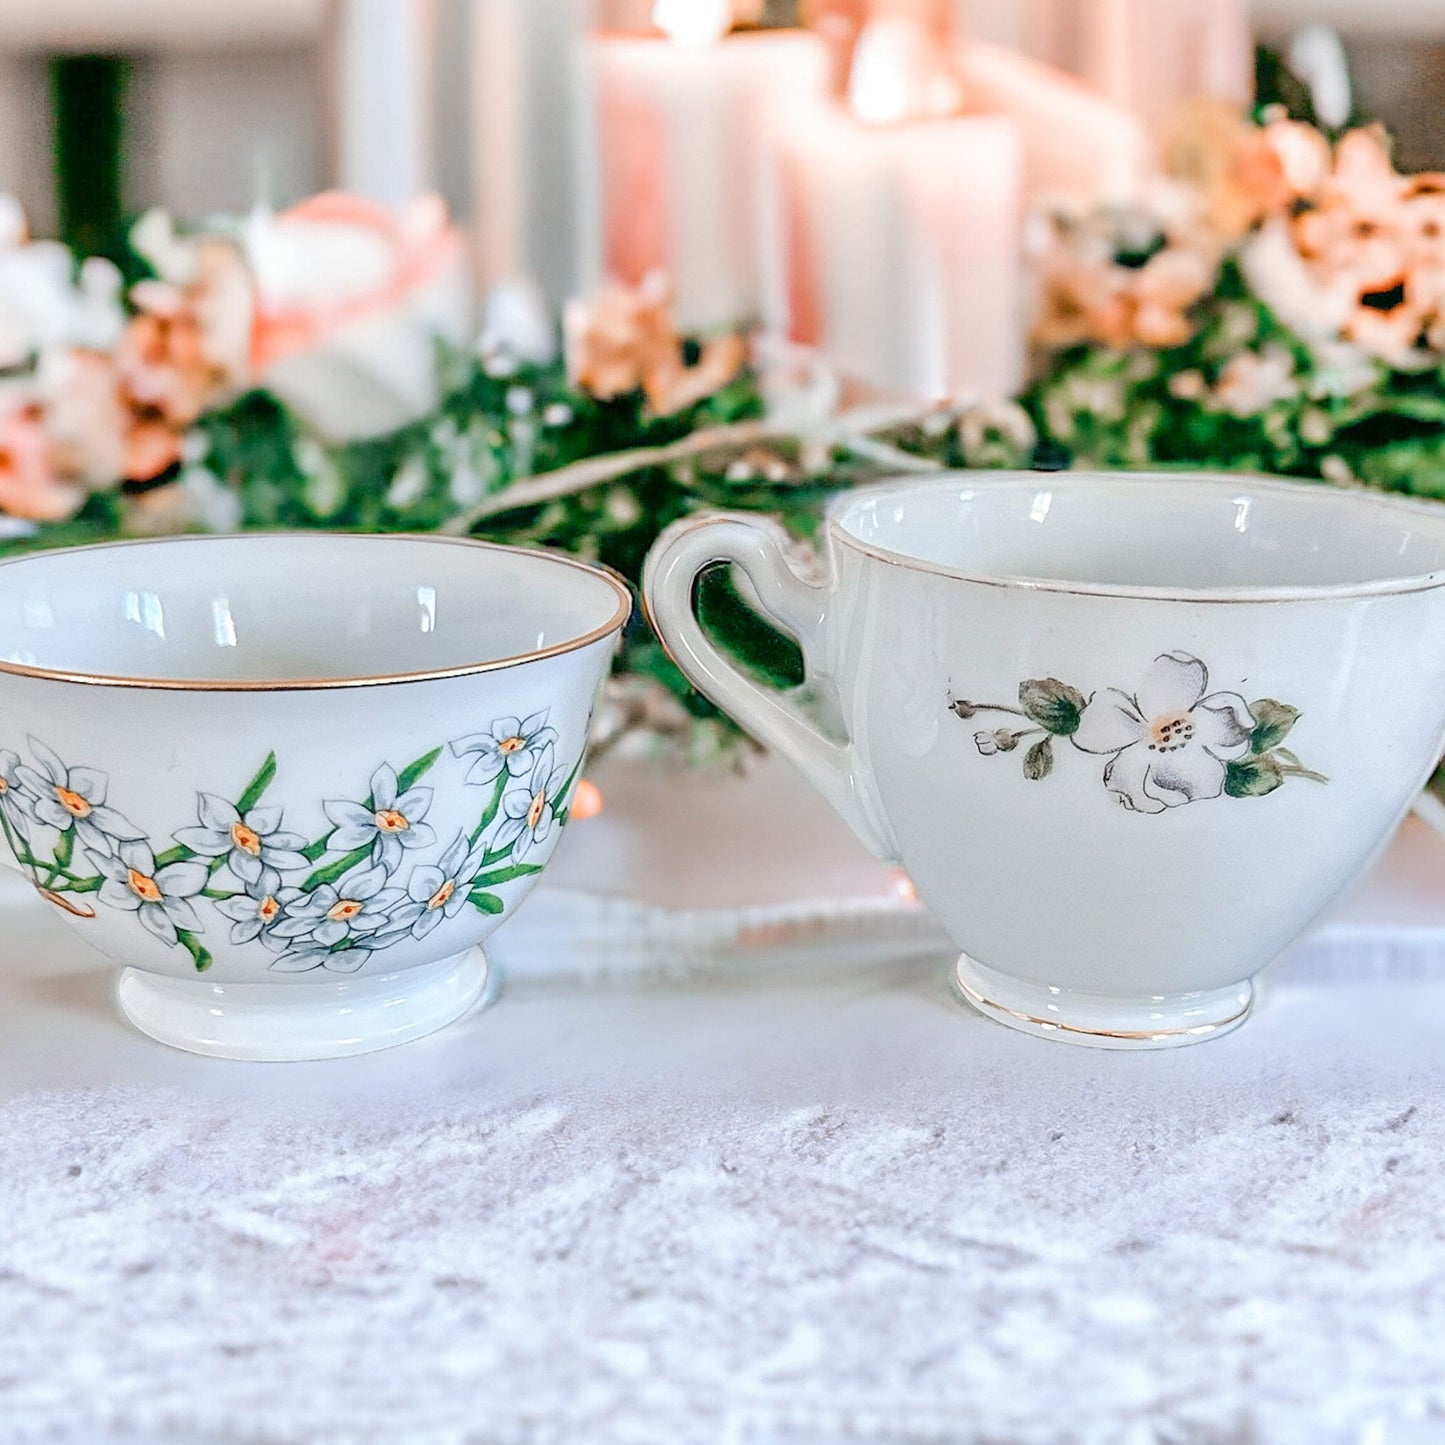 Scented Candle, Vintage, China, Teacup, Thinking of You Gift